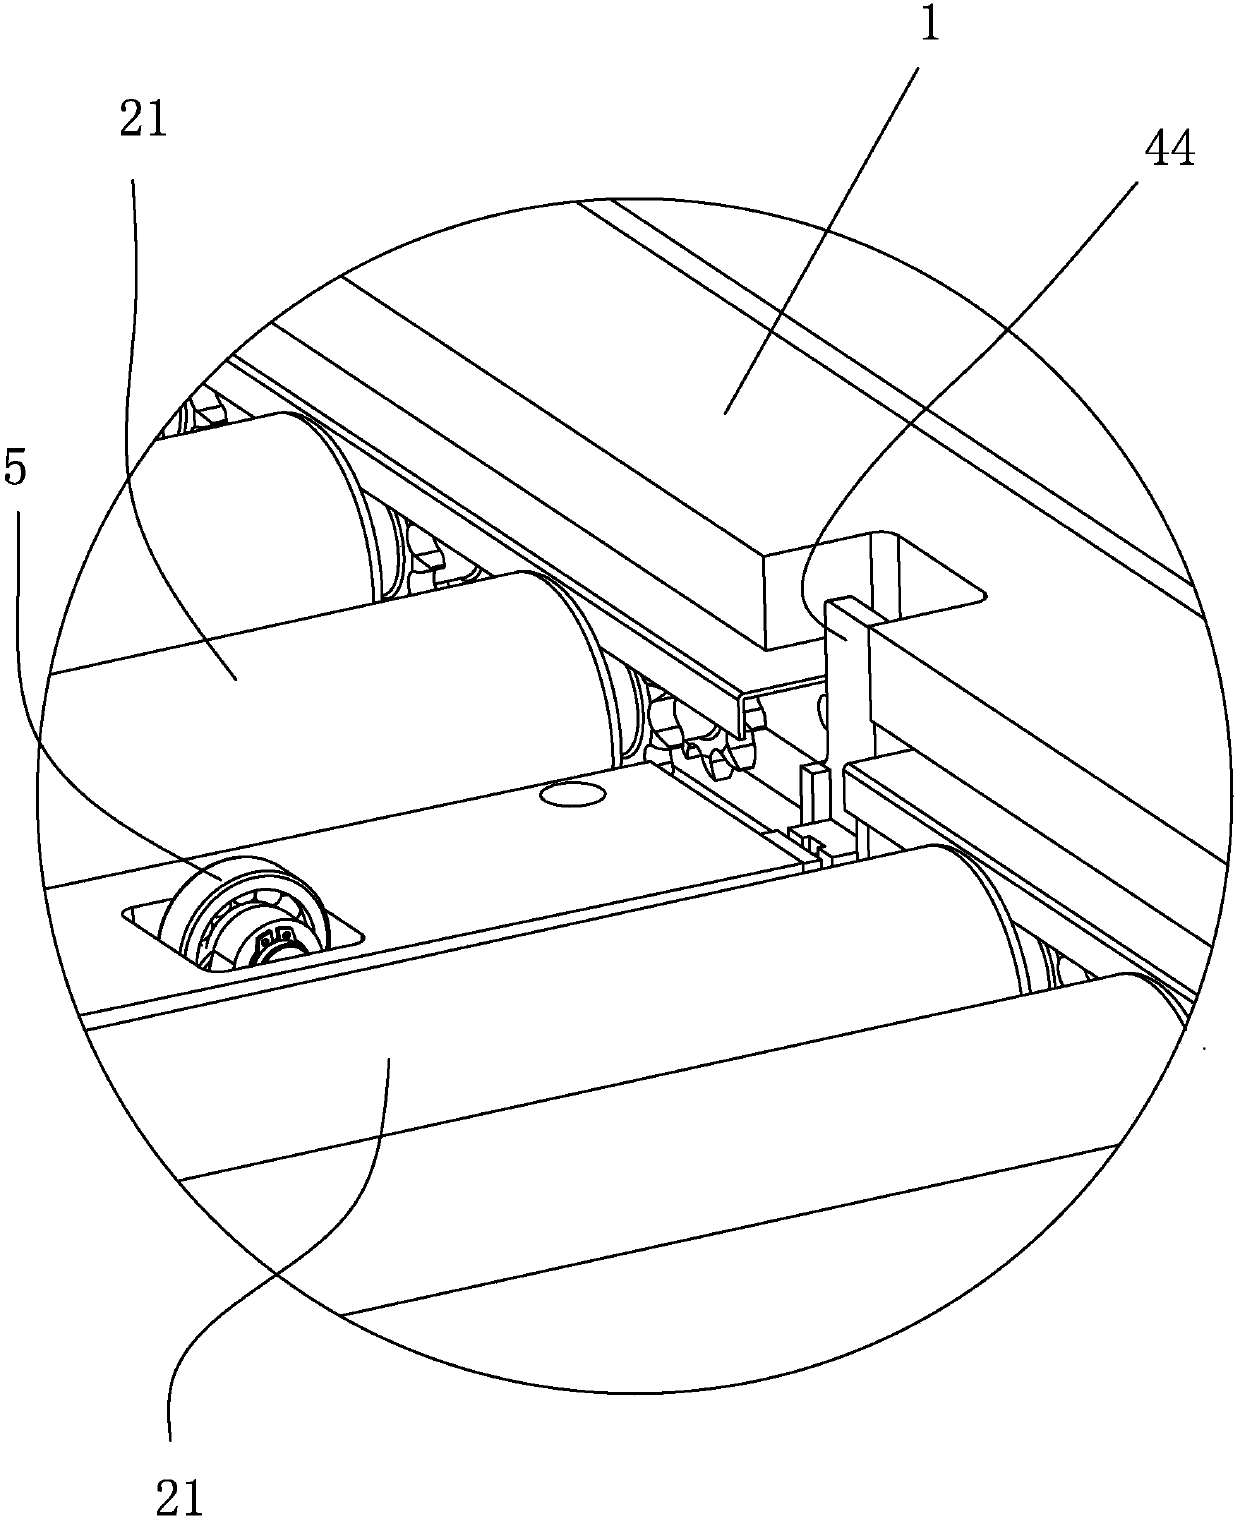 Screen feeding mechanism used for television assembling